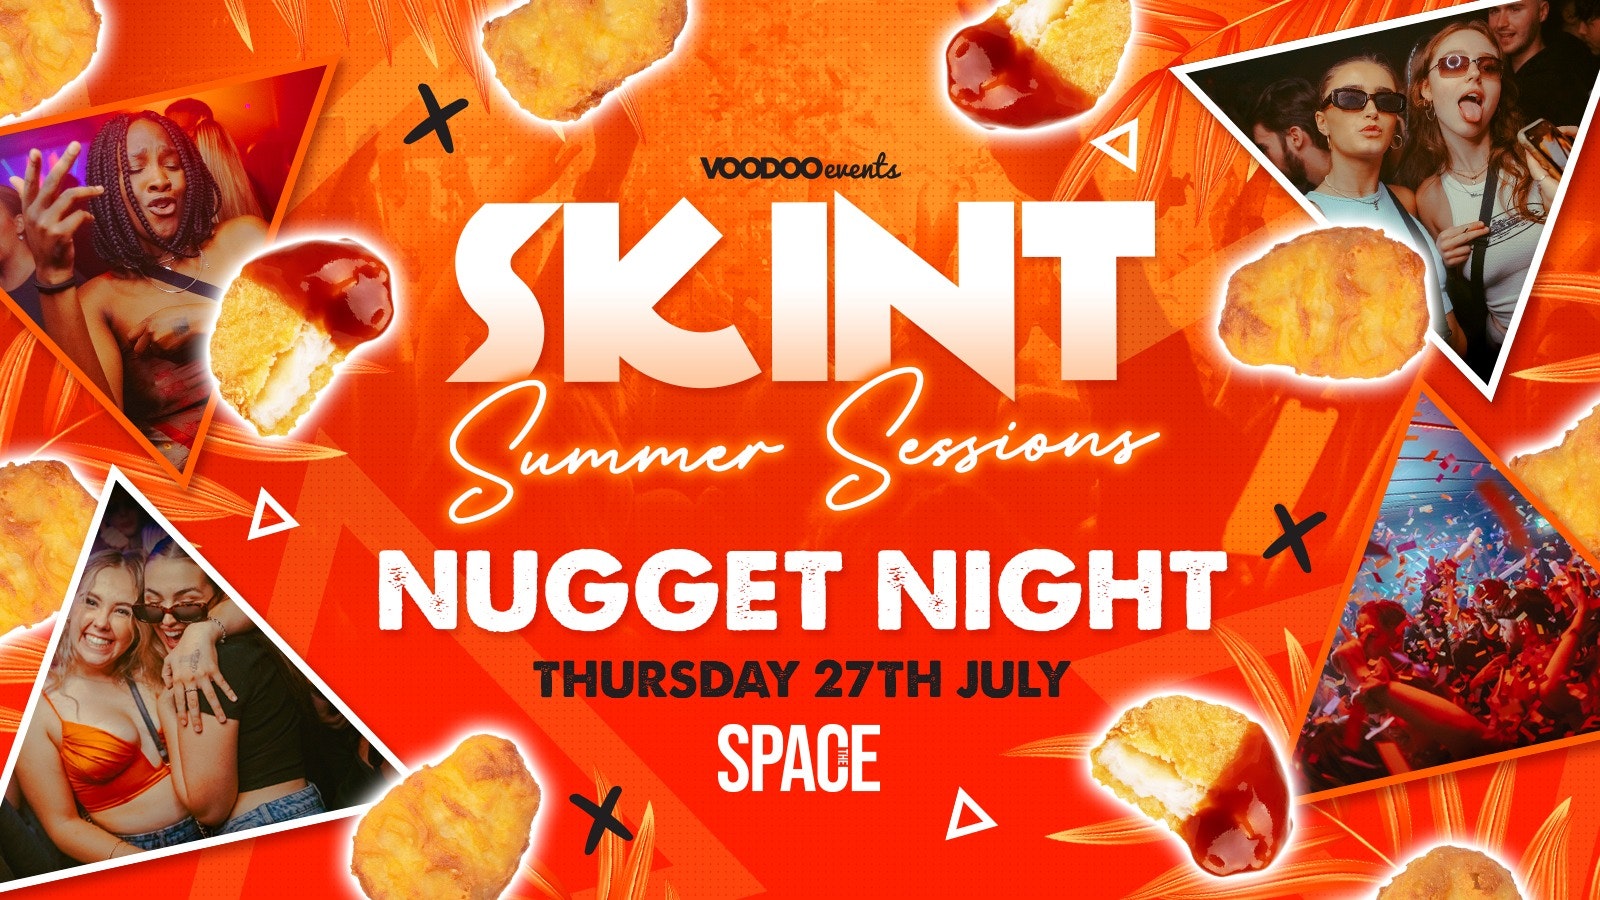 Skint Thursdays at Space – Nugget Night – 27th July